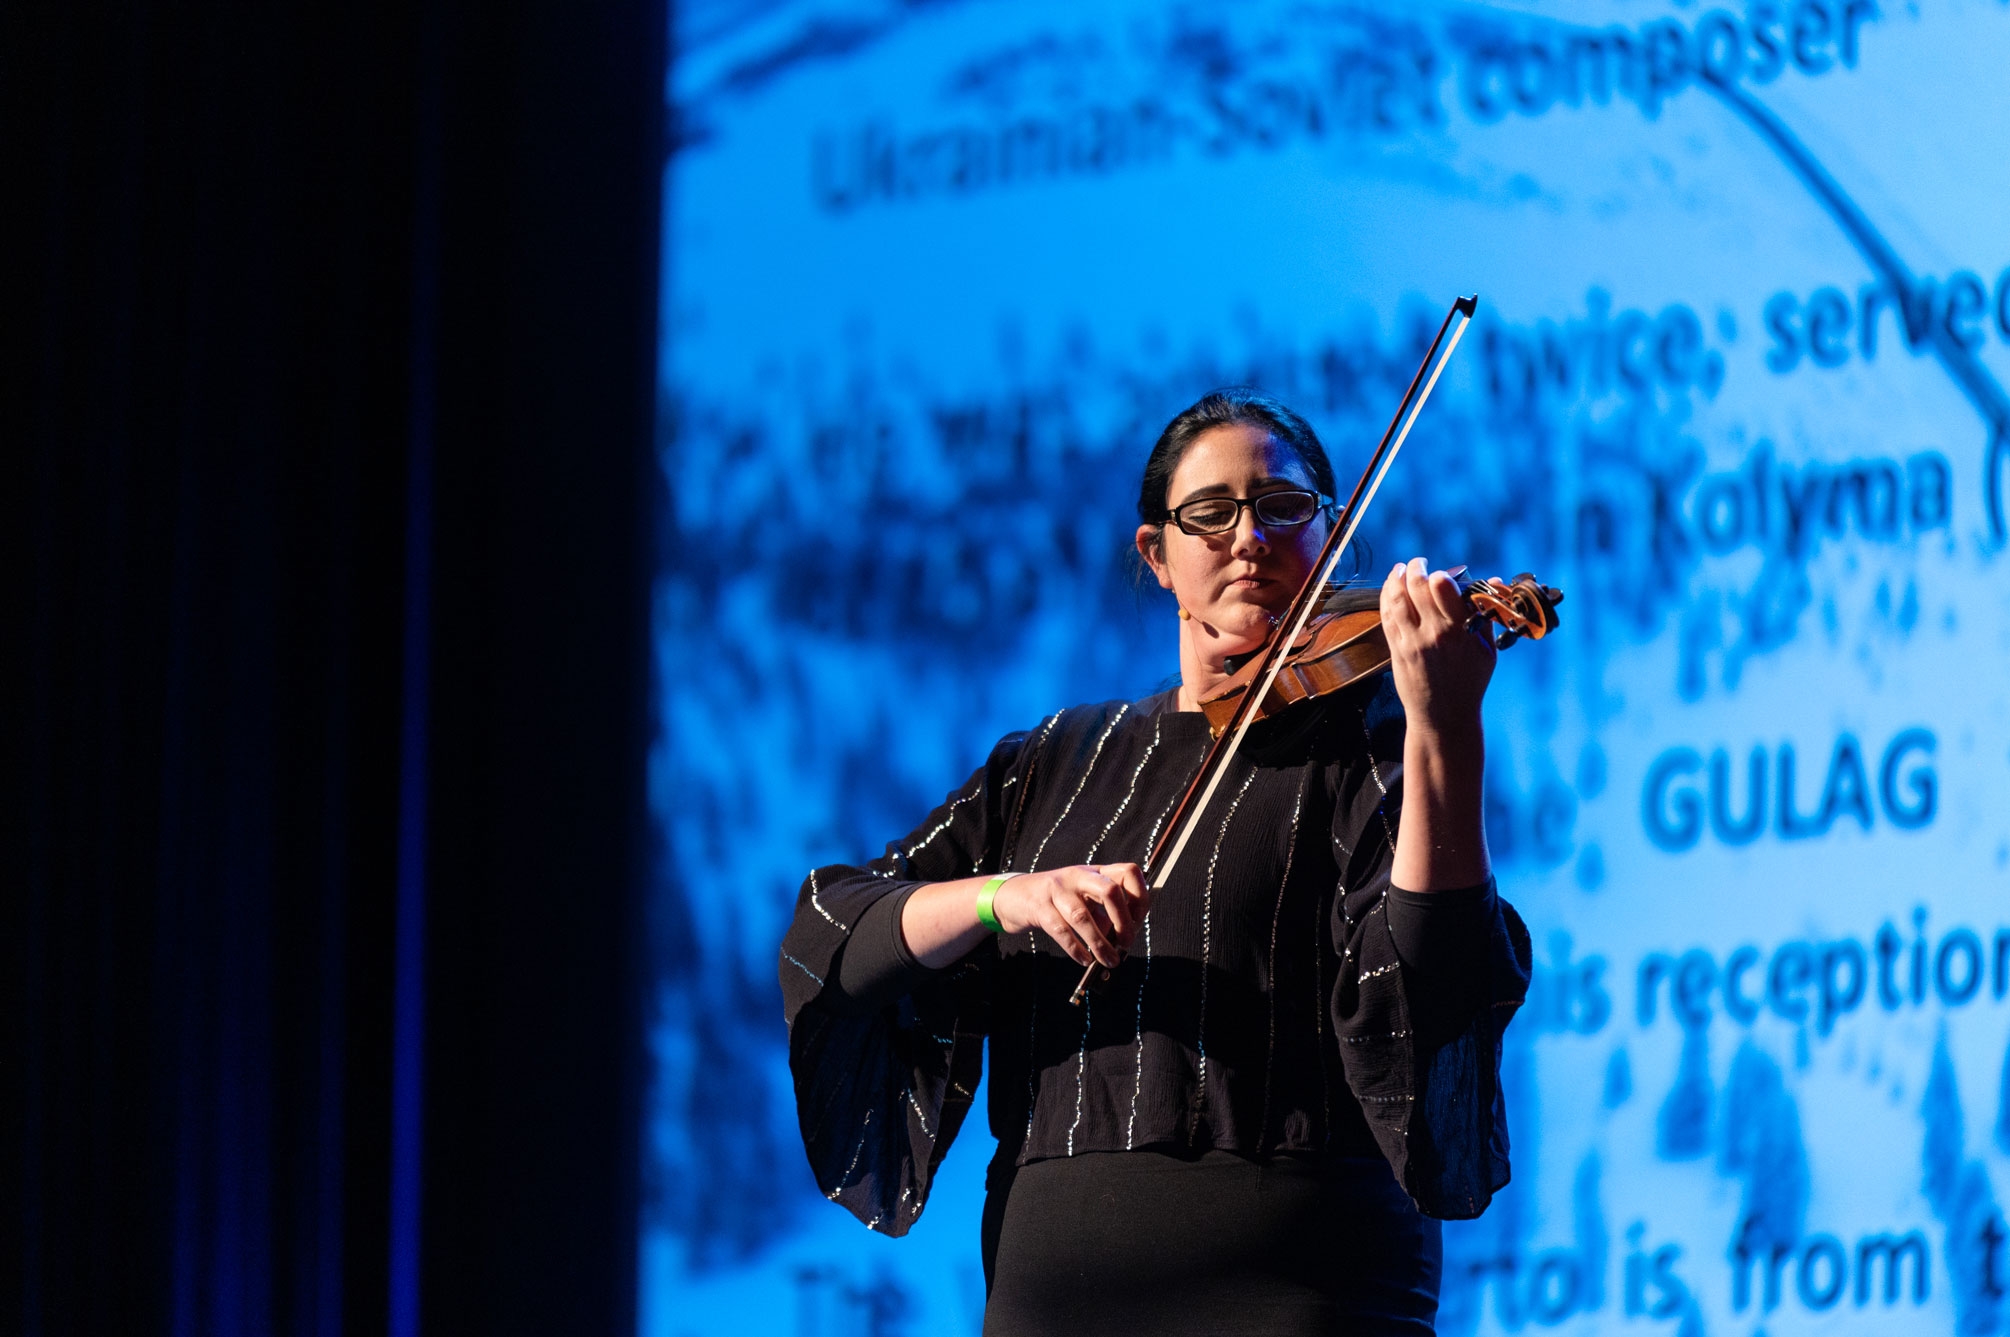 woman plays violin on stage